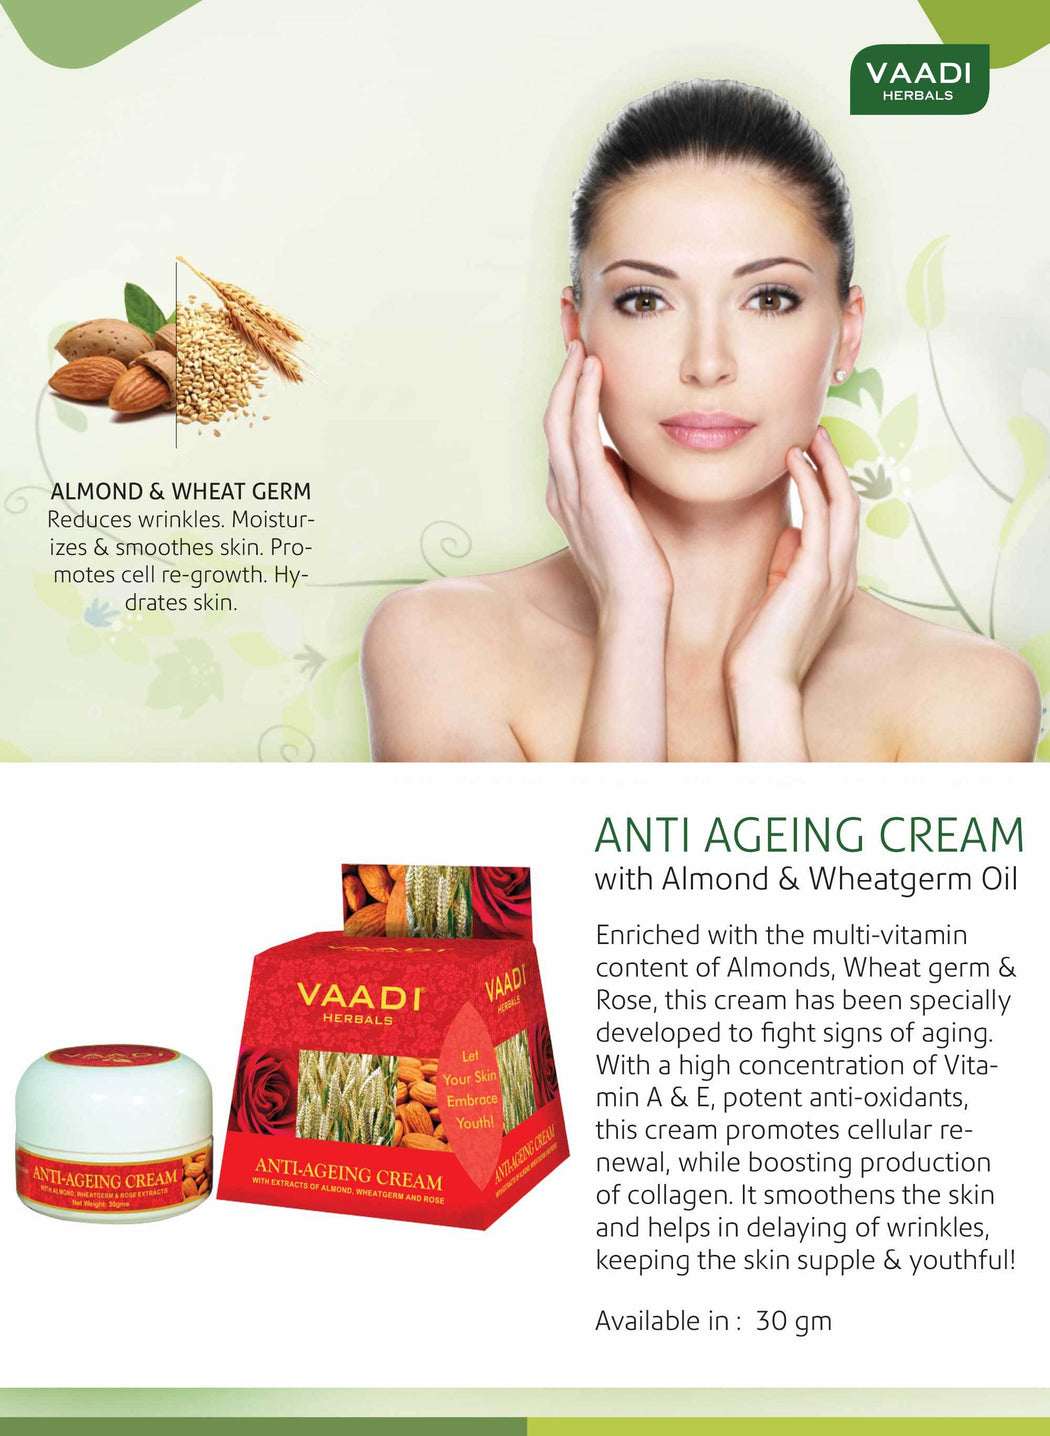 Organic Anti Ageing Cream with Almond, Wheatgerm - Boosts Collagen & Delays Wrinkles - Keeps Skin Soft & Youthful (3 x 30 gms /1.1 oz)